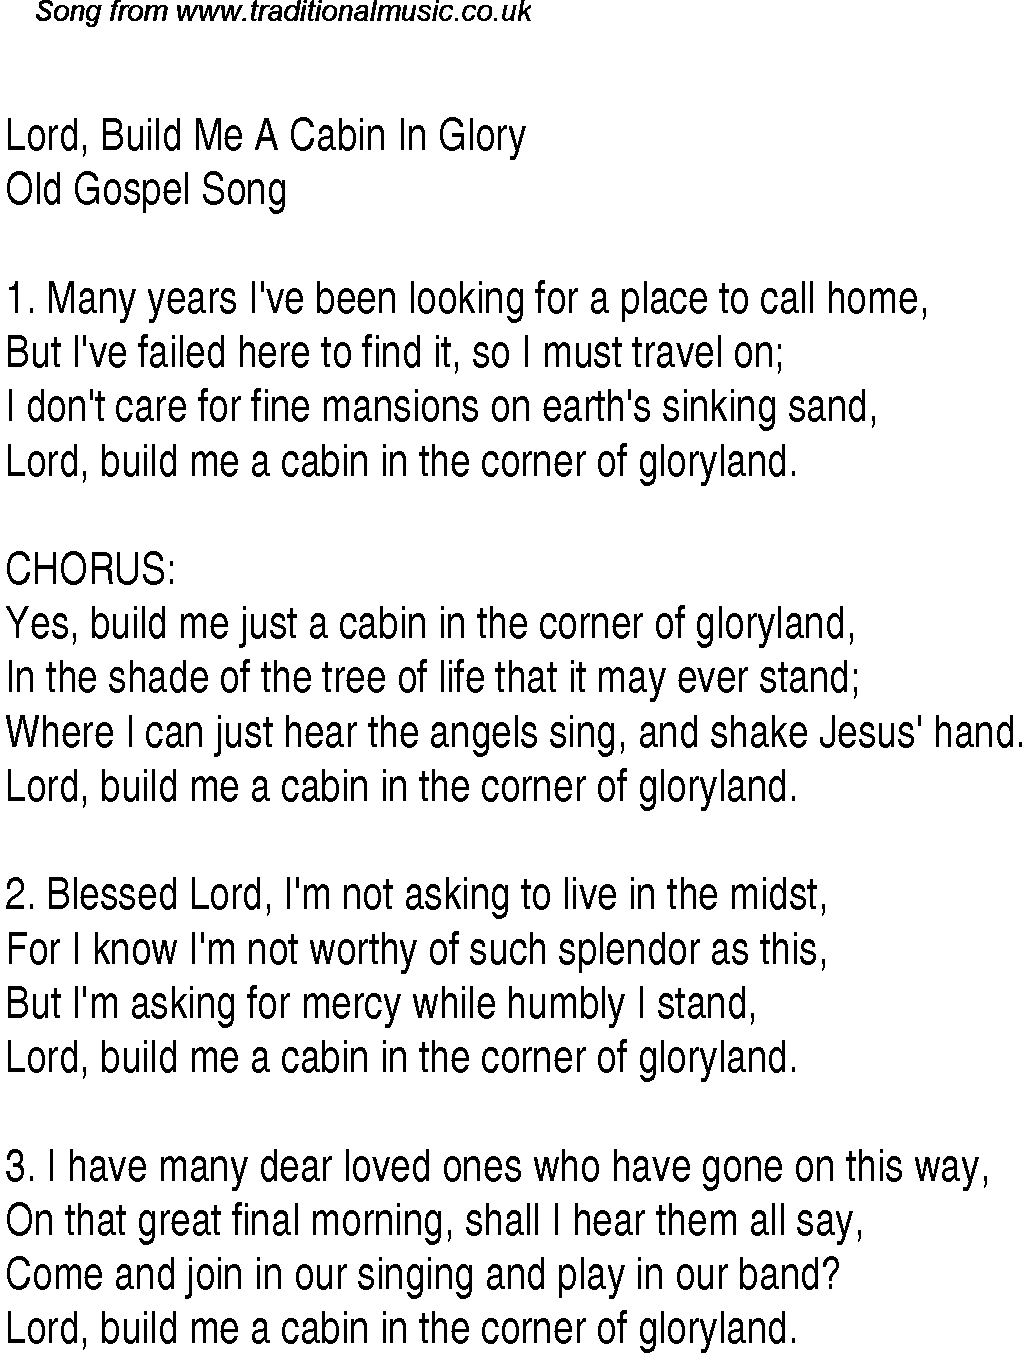 Gospel Song: lord,-build-me-a-cabin-in-glory, lyrics and chords.